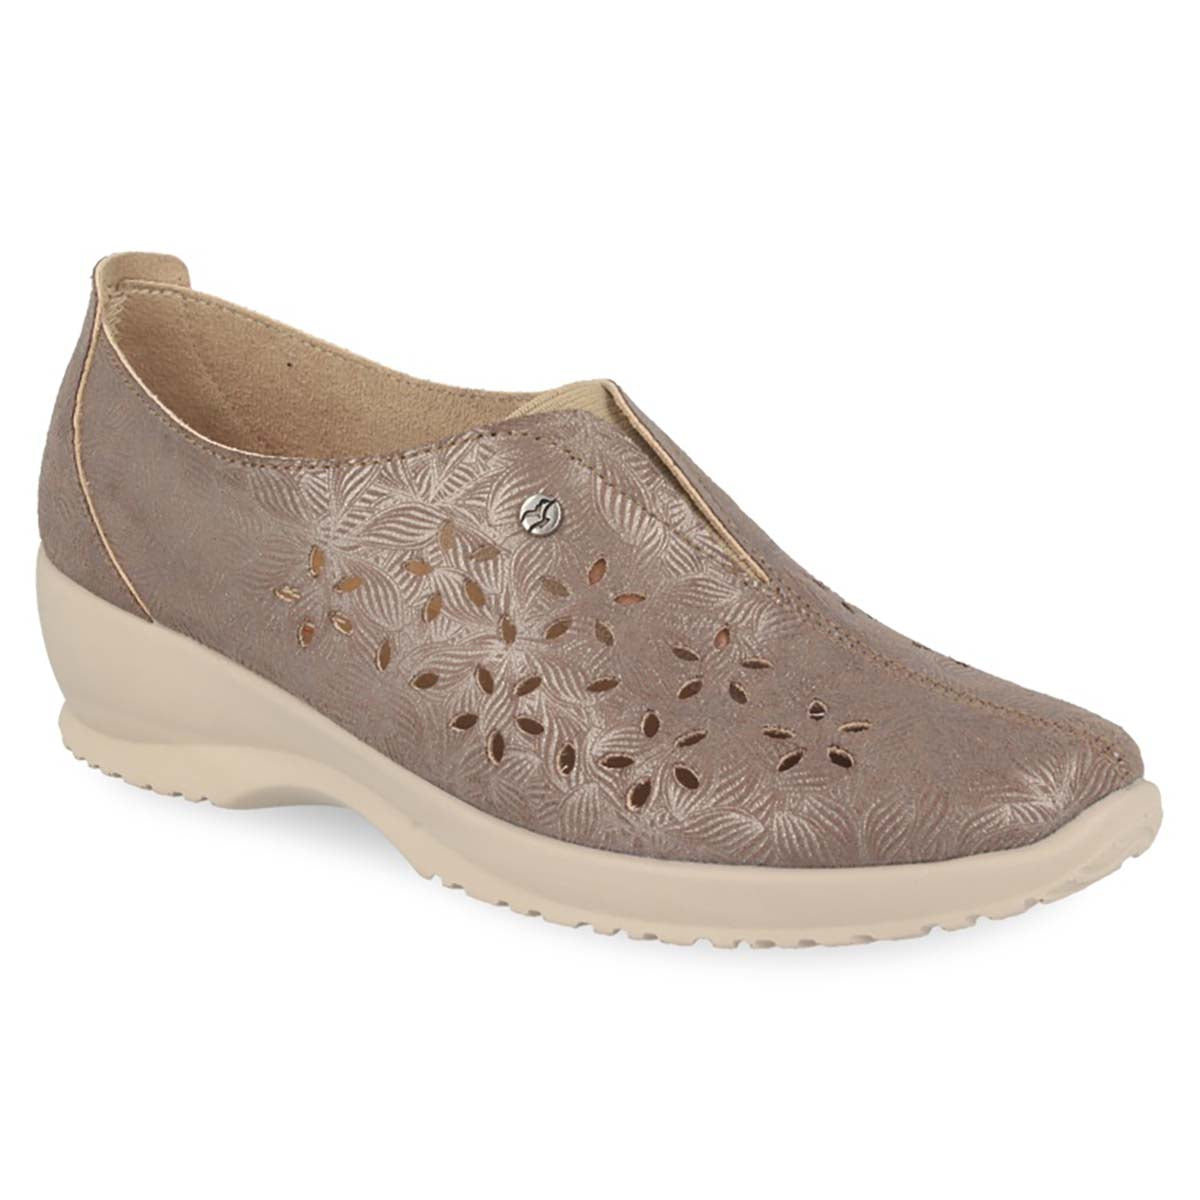 See photos Cloth Woman Shoe Taupe (17A91M5)